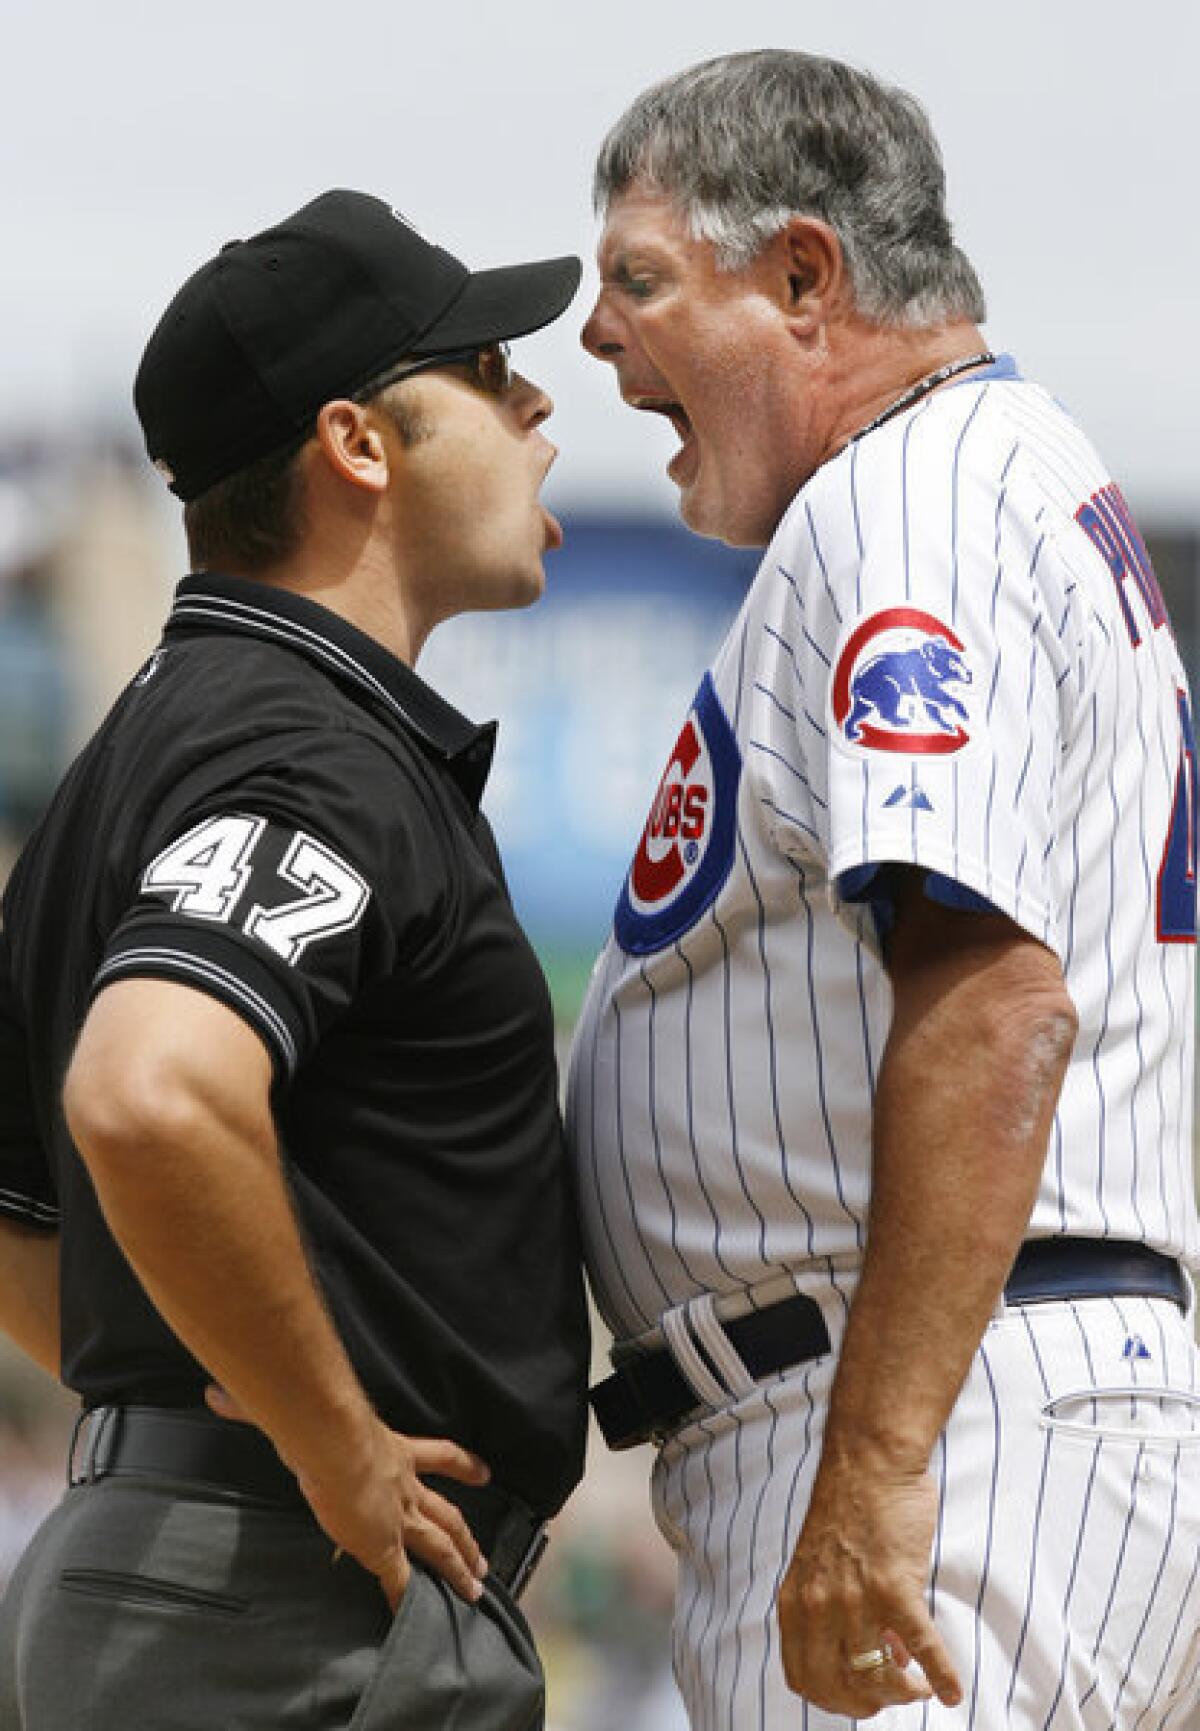 Then-Chicago Cubs Manager Lou Piniella argues with umpire Mark Wegner in 2007. Piniella was ejected by Wegner.